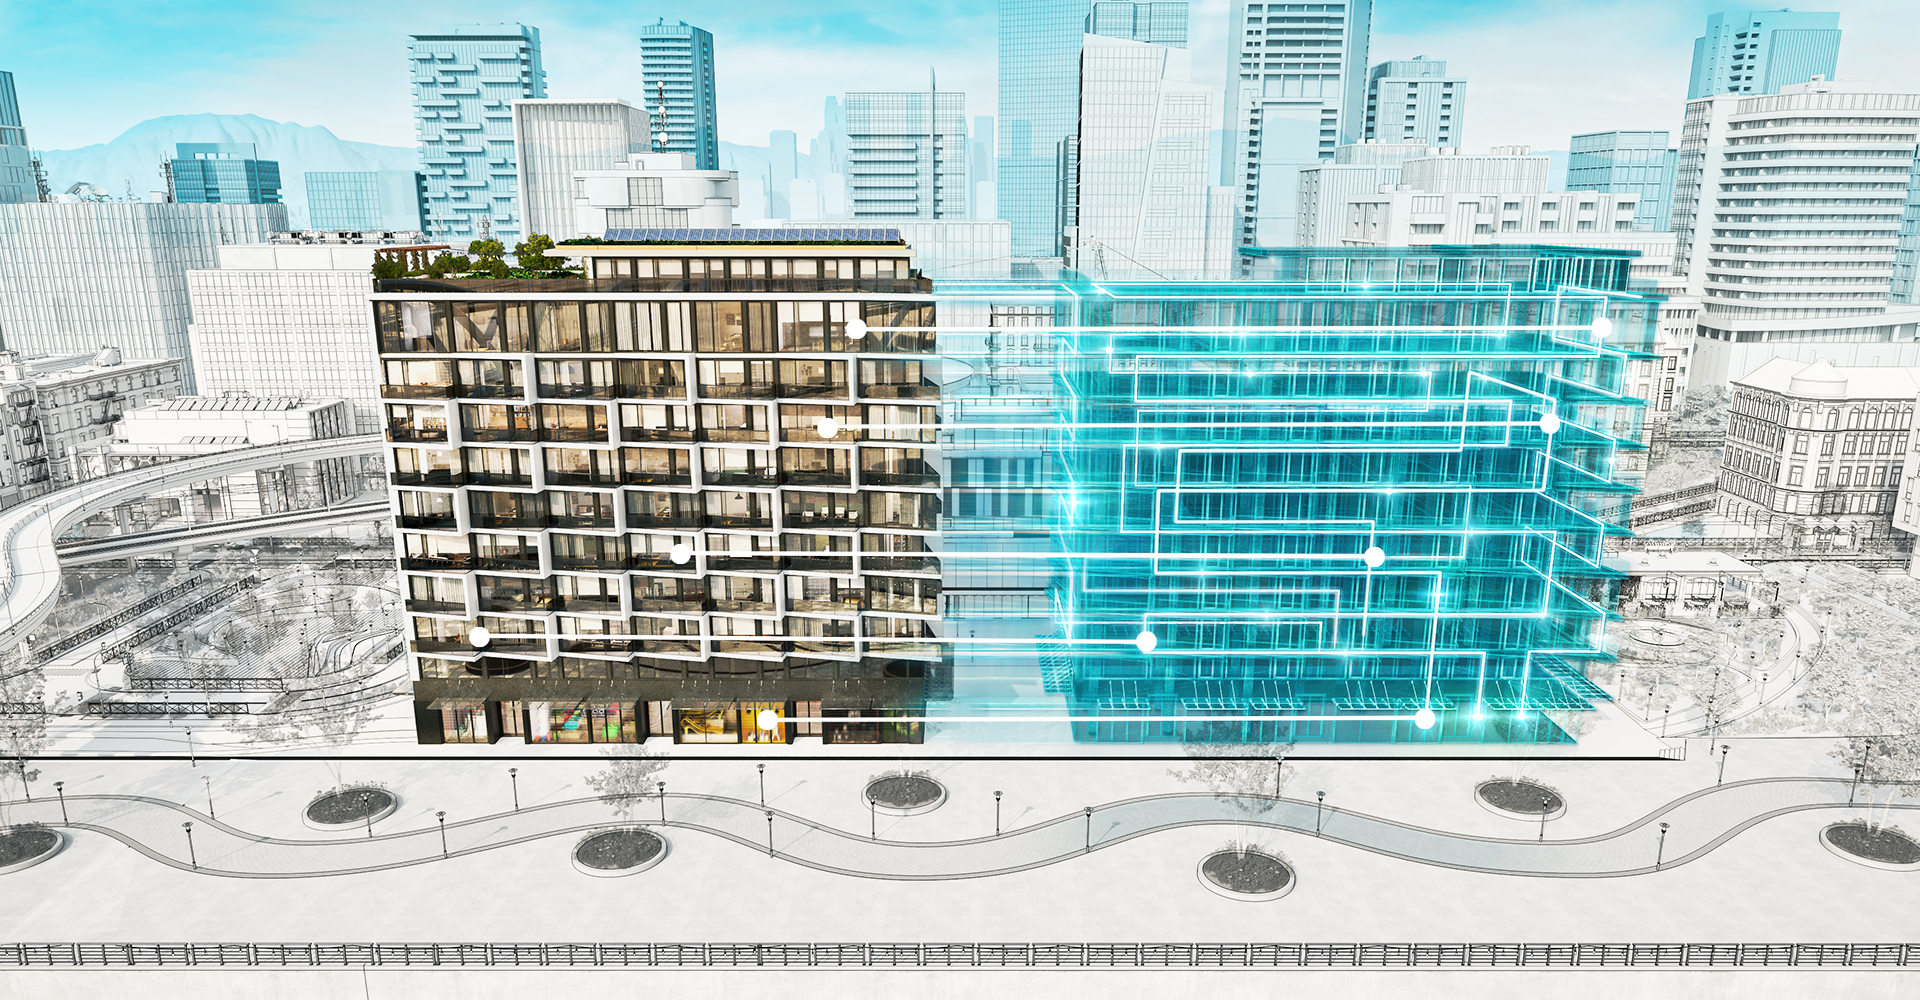 digital twin technology applied to a building